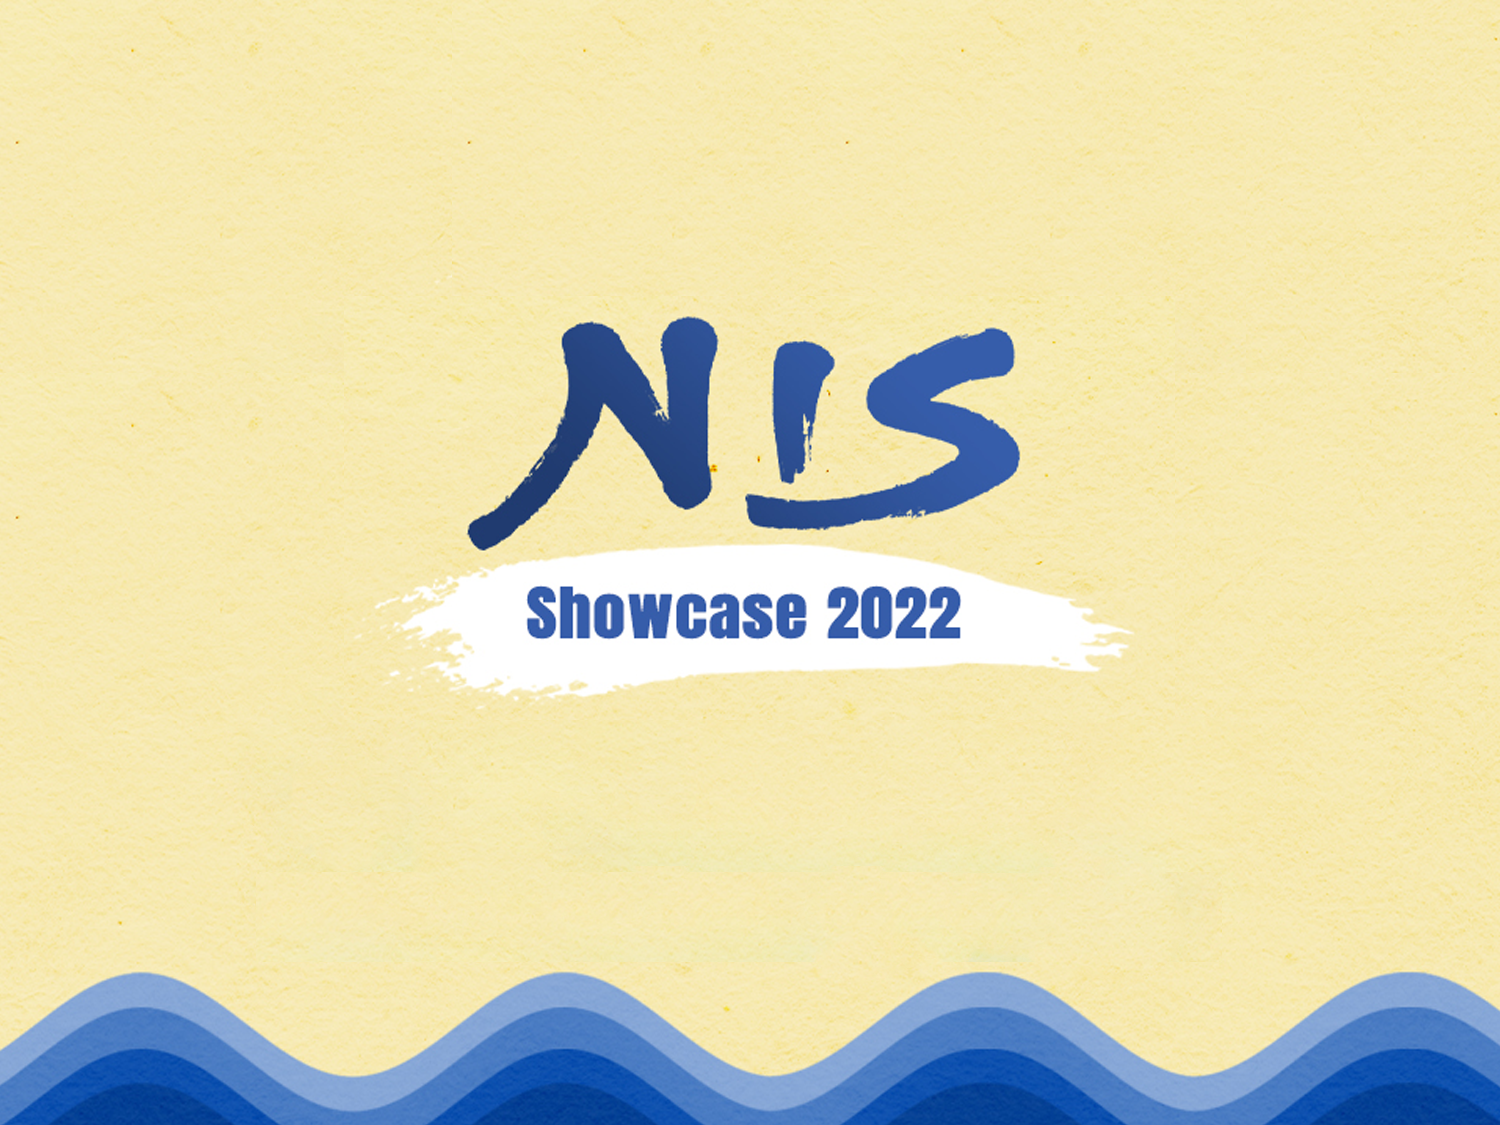 CHECK OUT THE LATEST NISA ONLINE STORE LIMITED EDITIONS, FEATURING TITLES ANNOUNCED AT THE NISA SHOWCASE 2022!